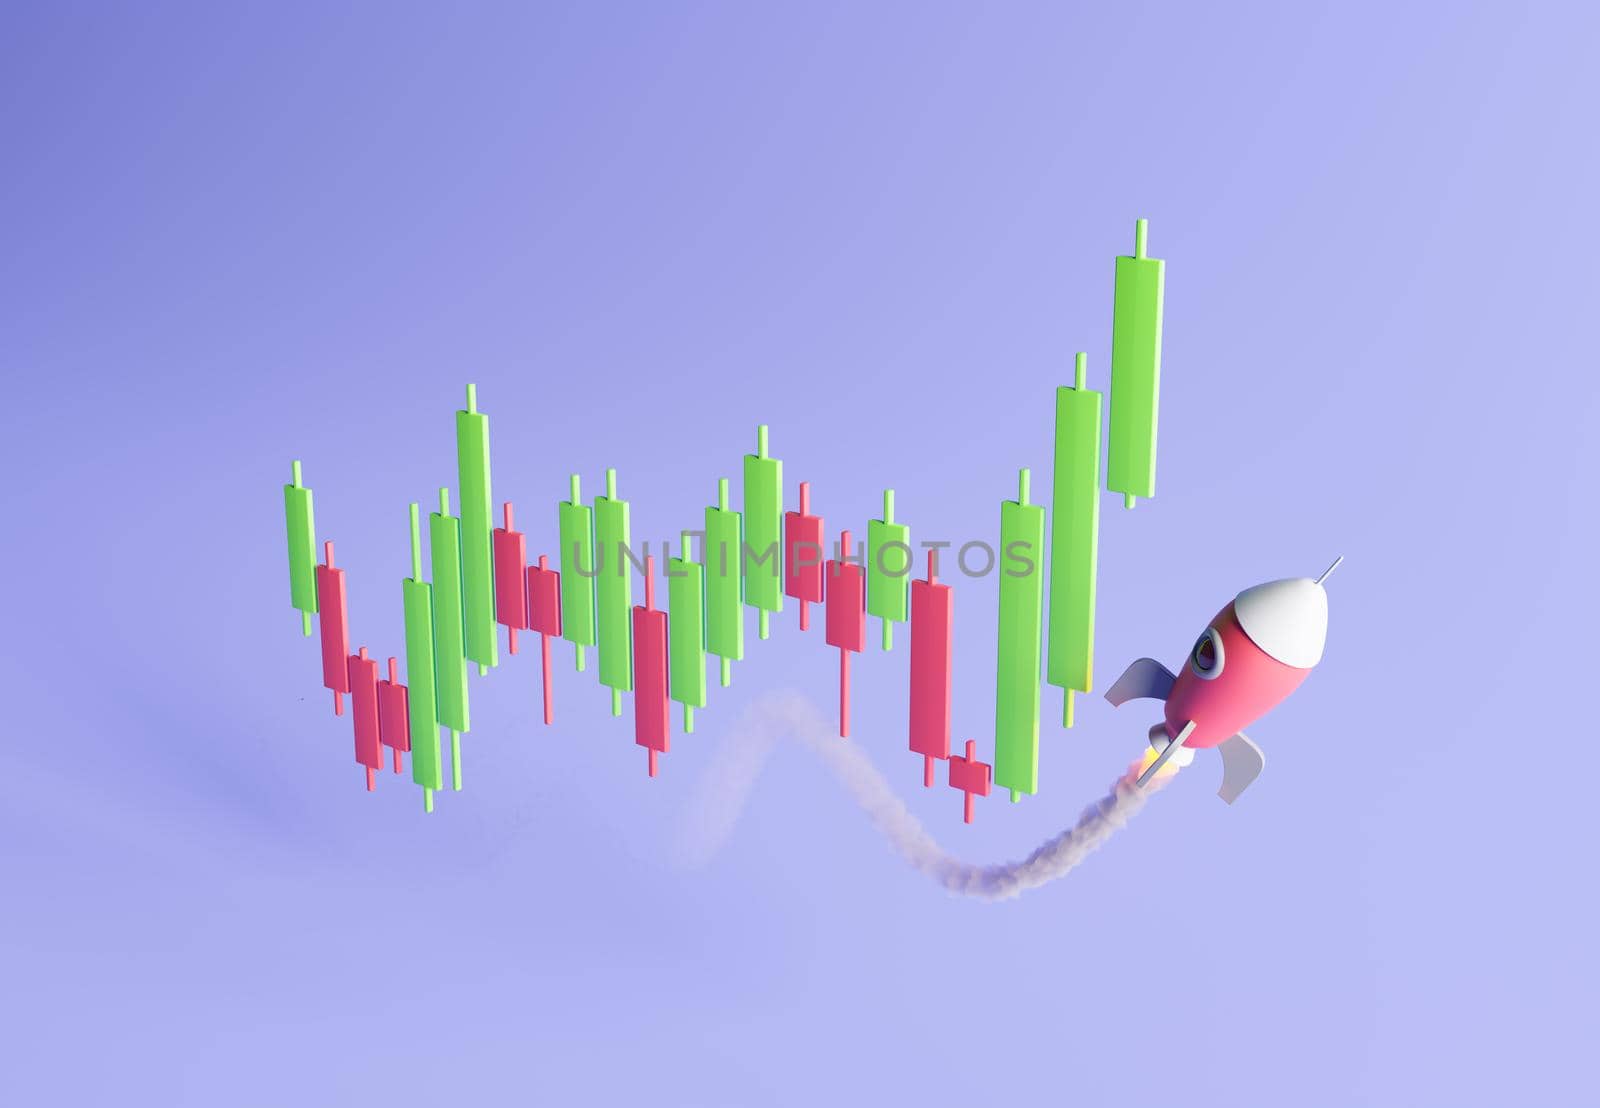 candlestick chart with a rocket ascending by asolano